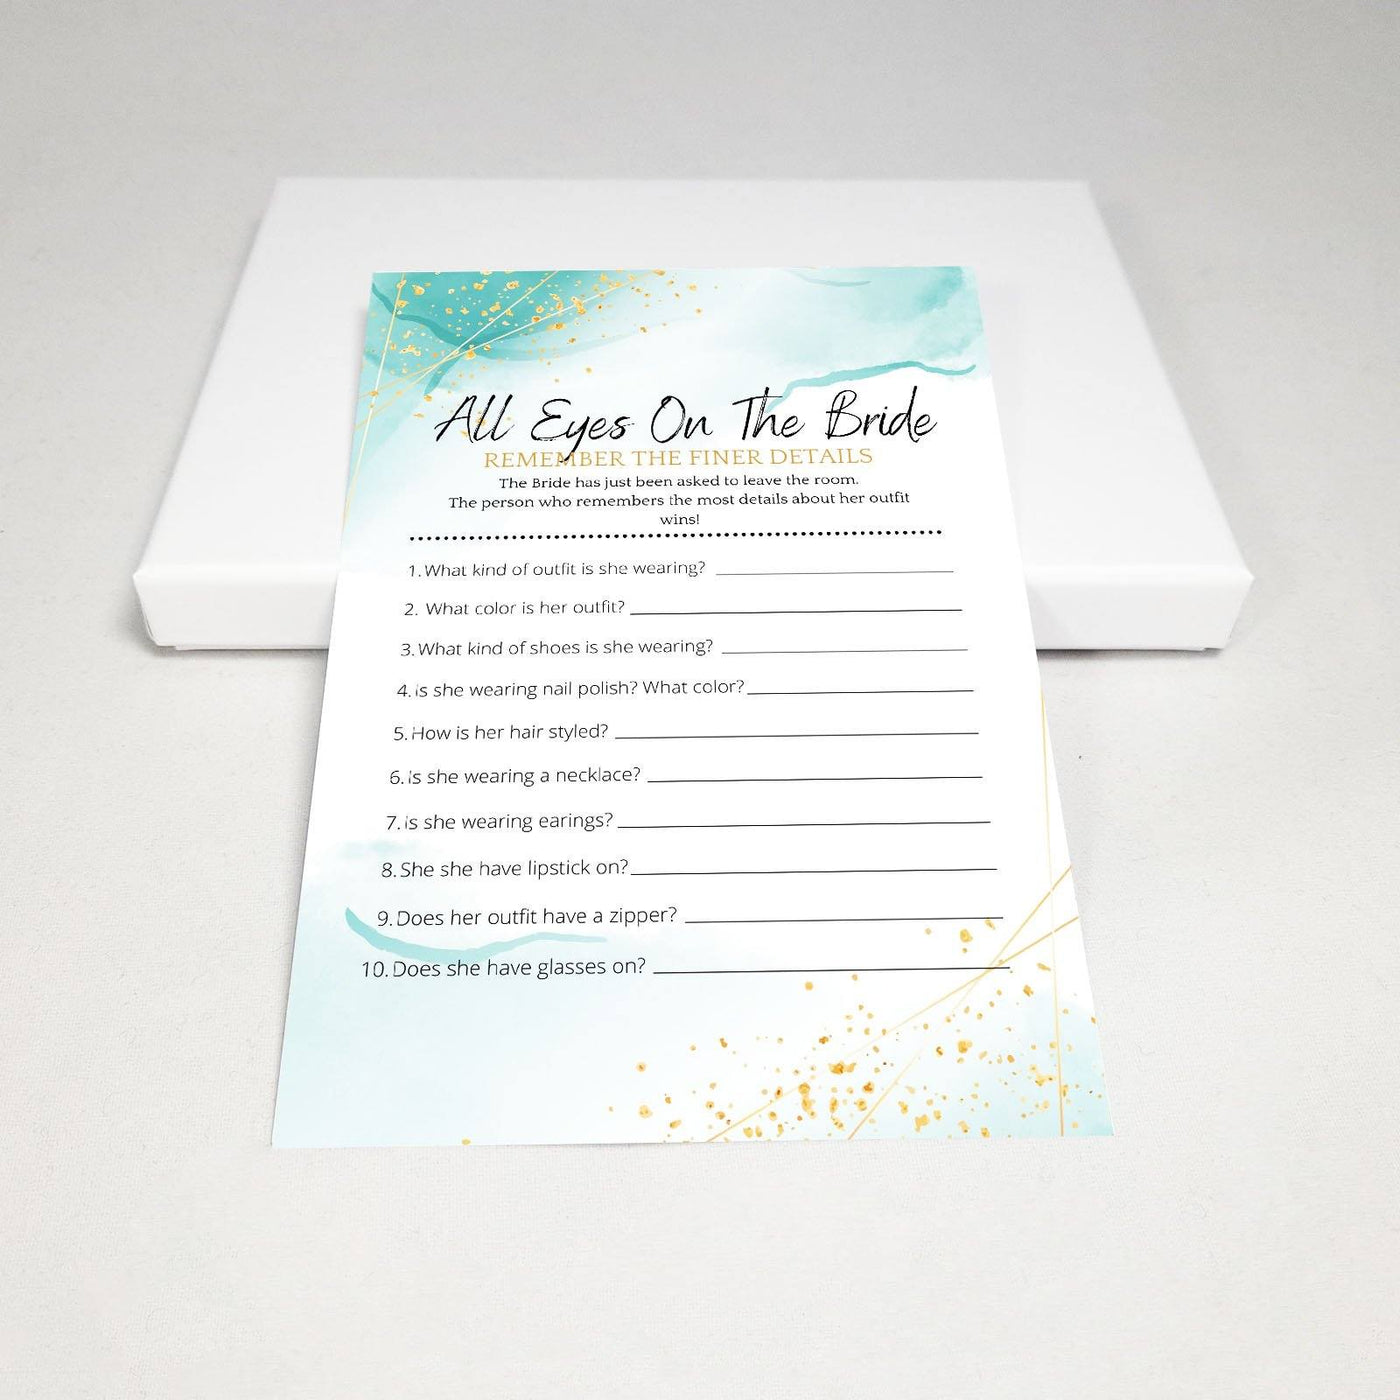 Ocean Gold - All Eyes On The Bride | Bridal Shower Game Party Games Your Party Games 